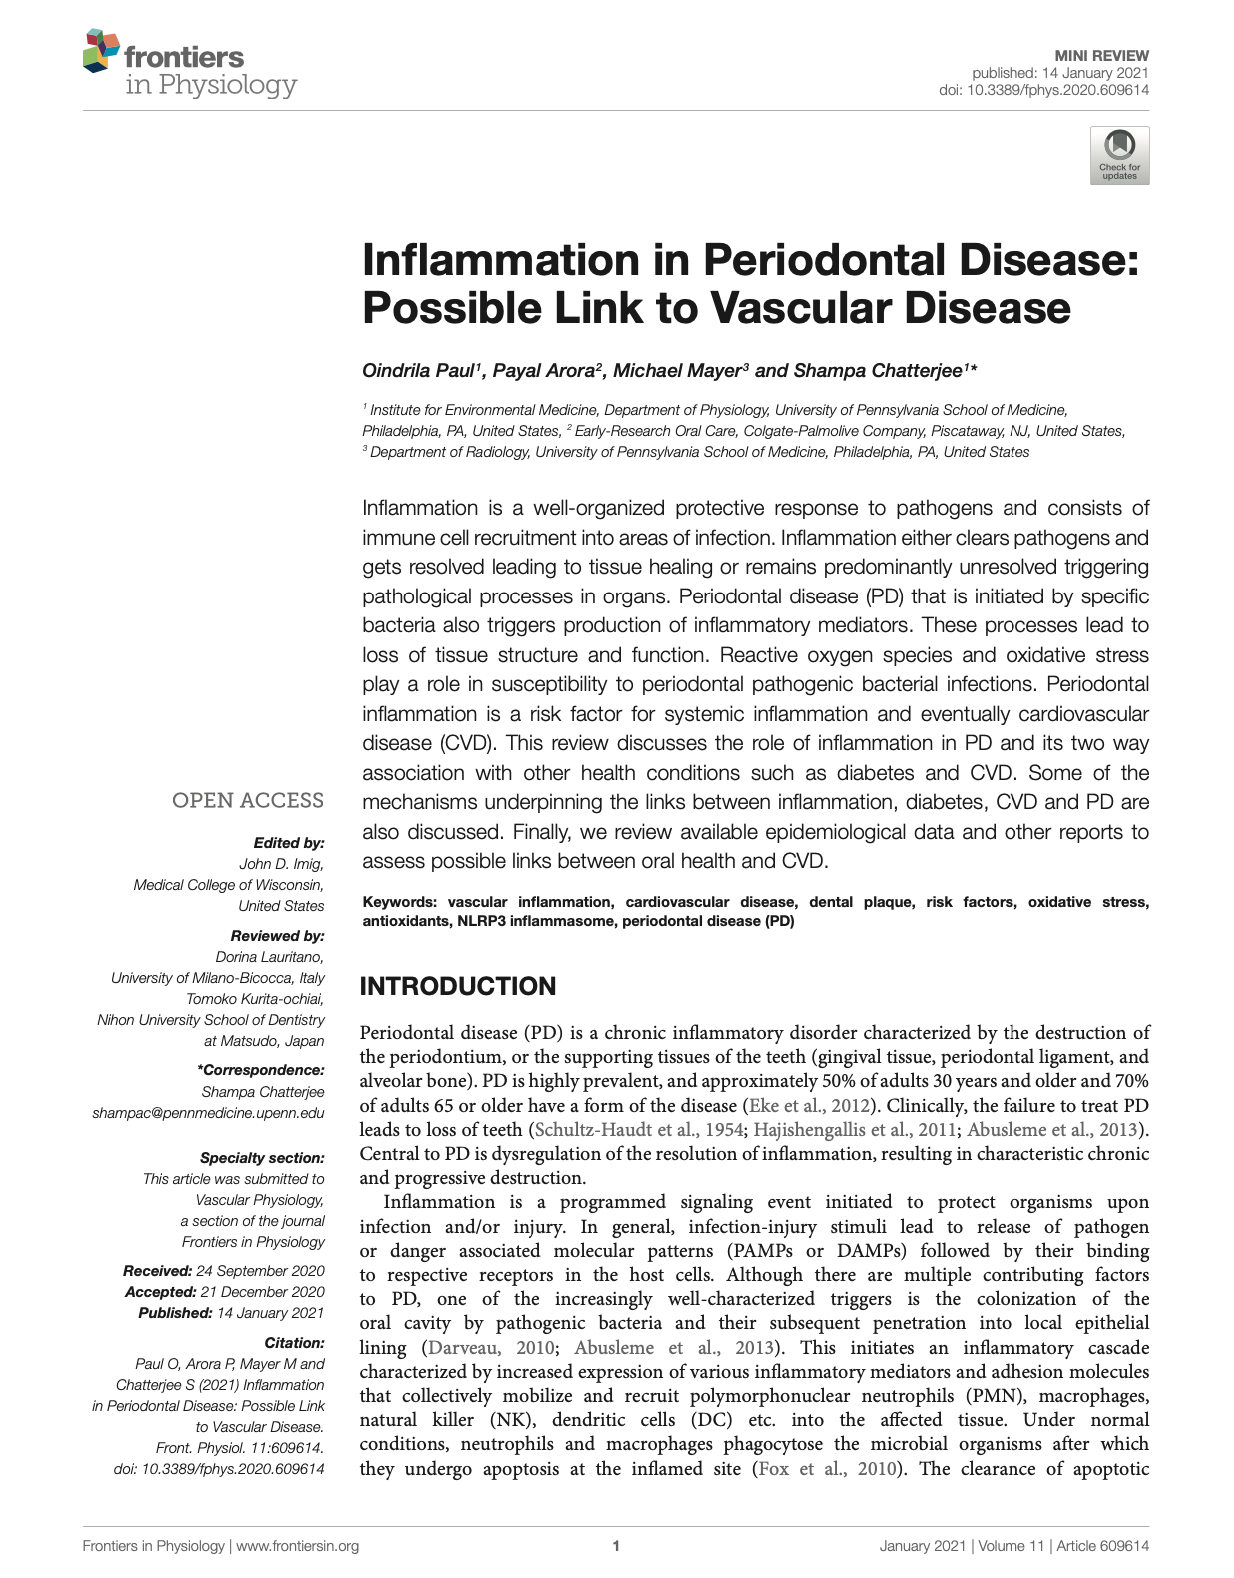 xInflammation in Periodontal Disease- Possible Link to Vascular Disease (1)